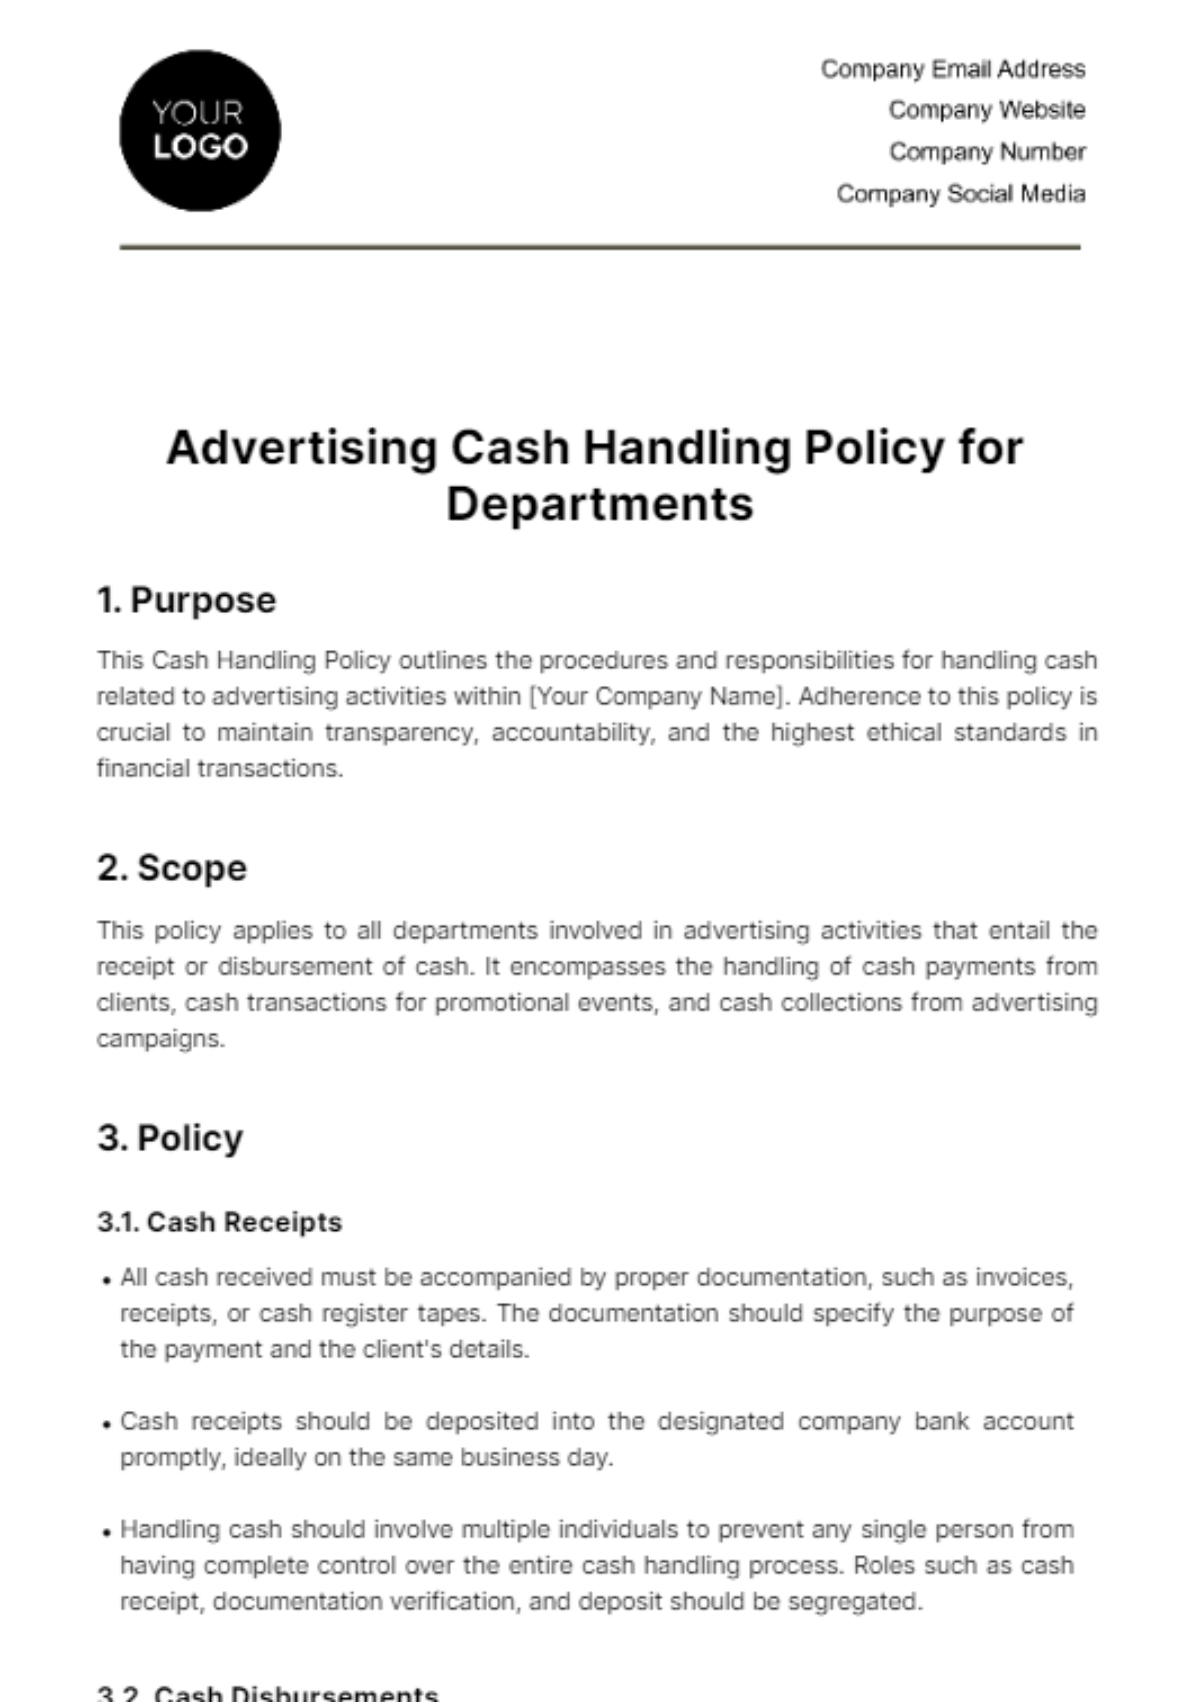 Free Advertising Cash Handling Policy for Departments Template